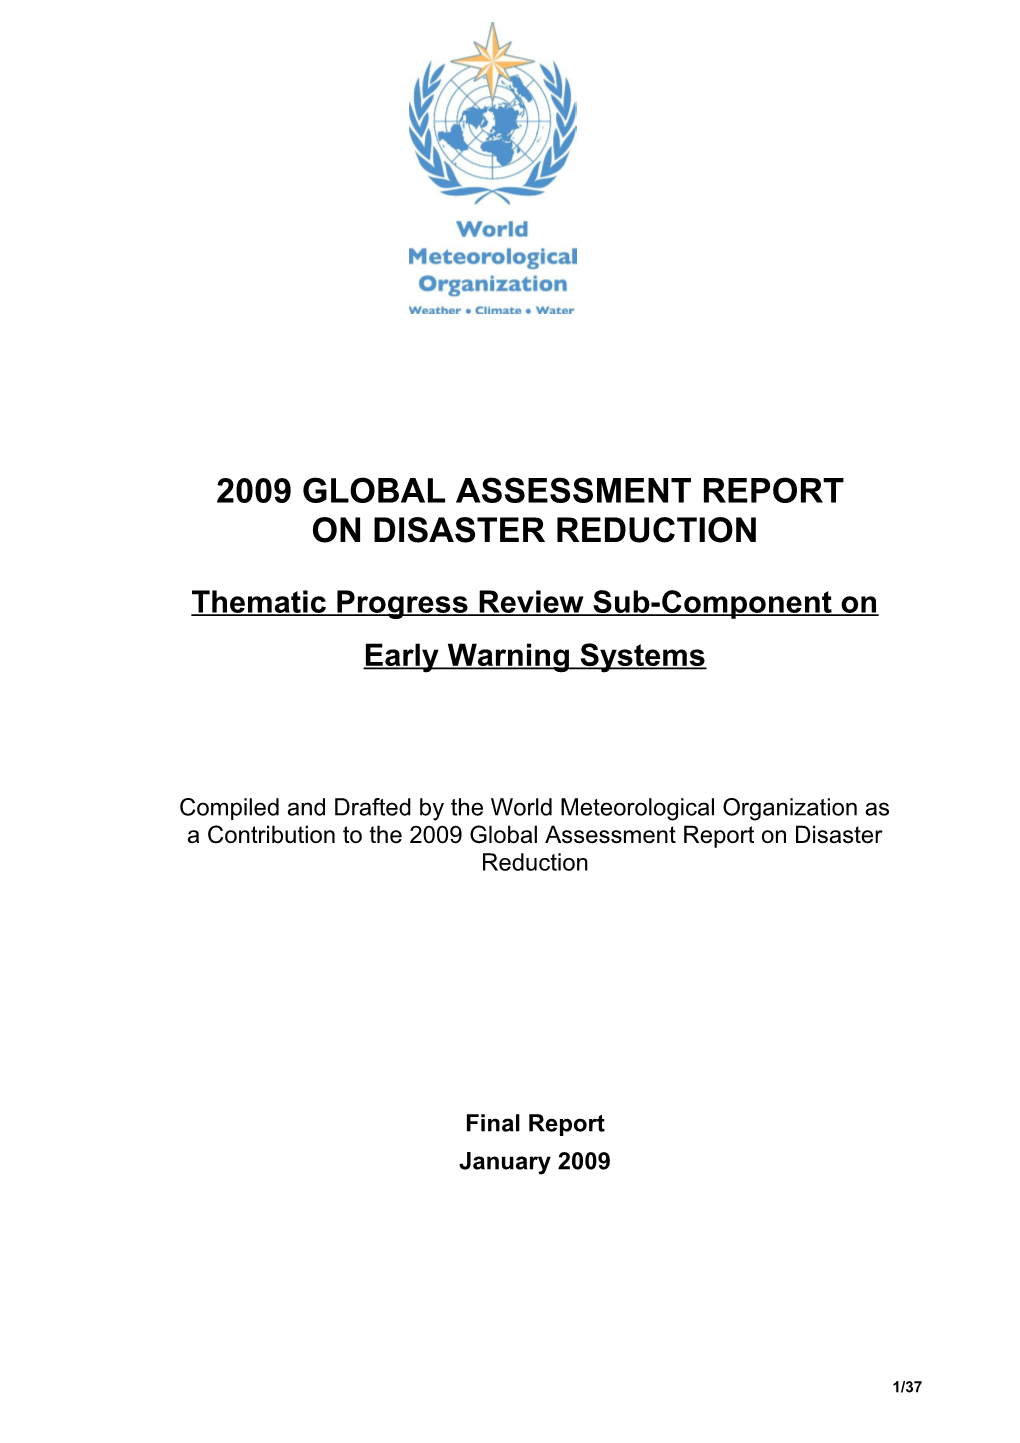 Thematic Progress Review Sub-Component on Early Warning Systems